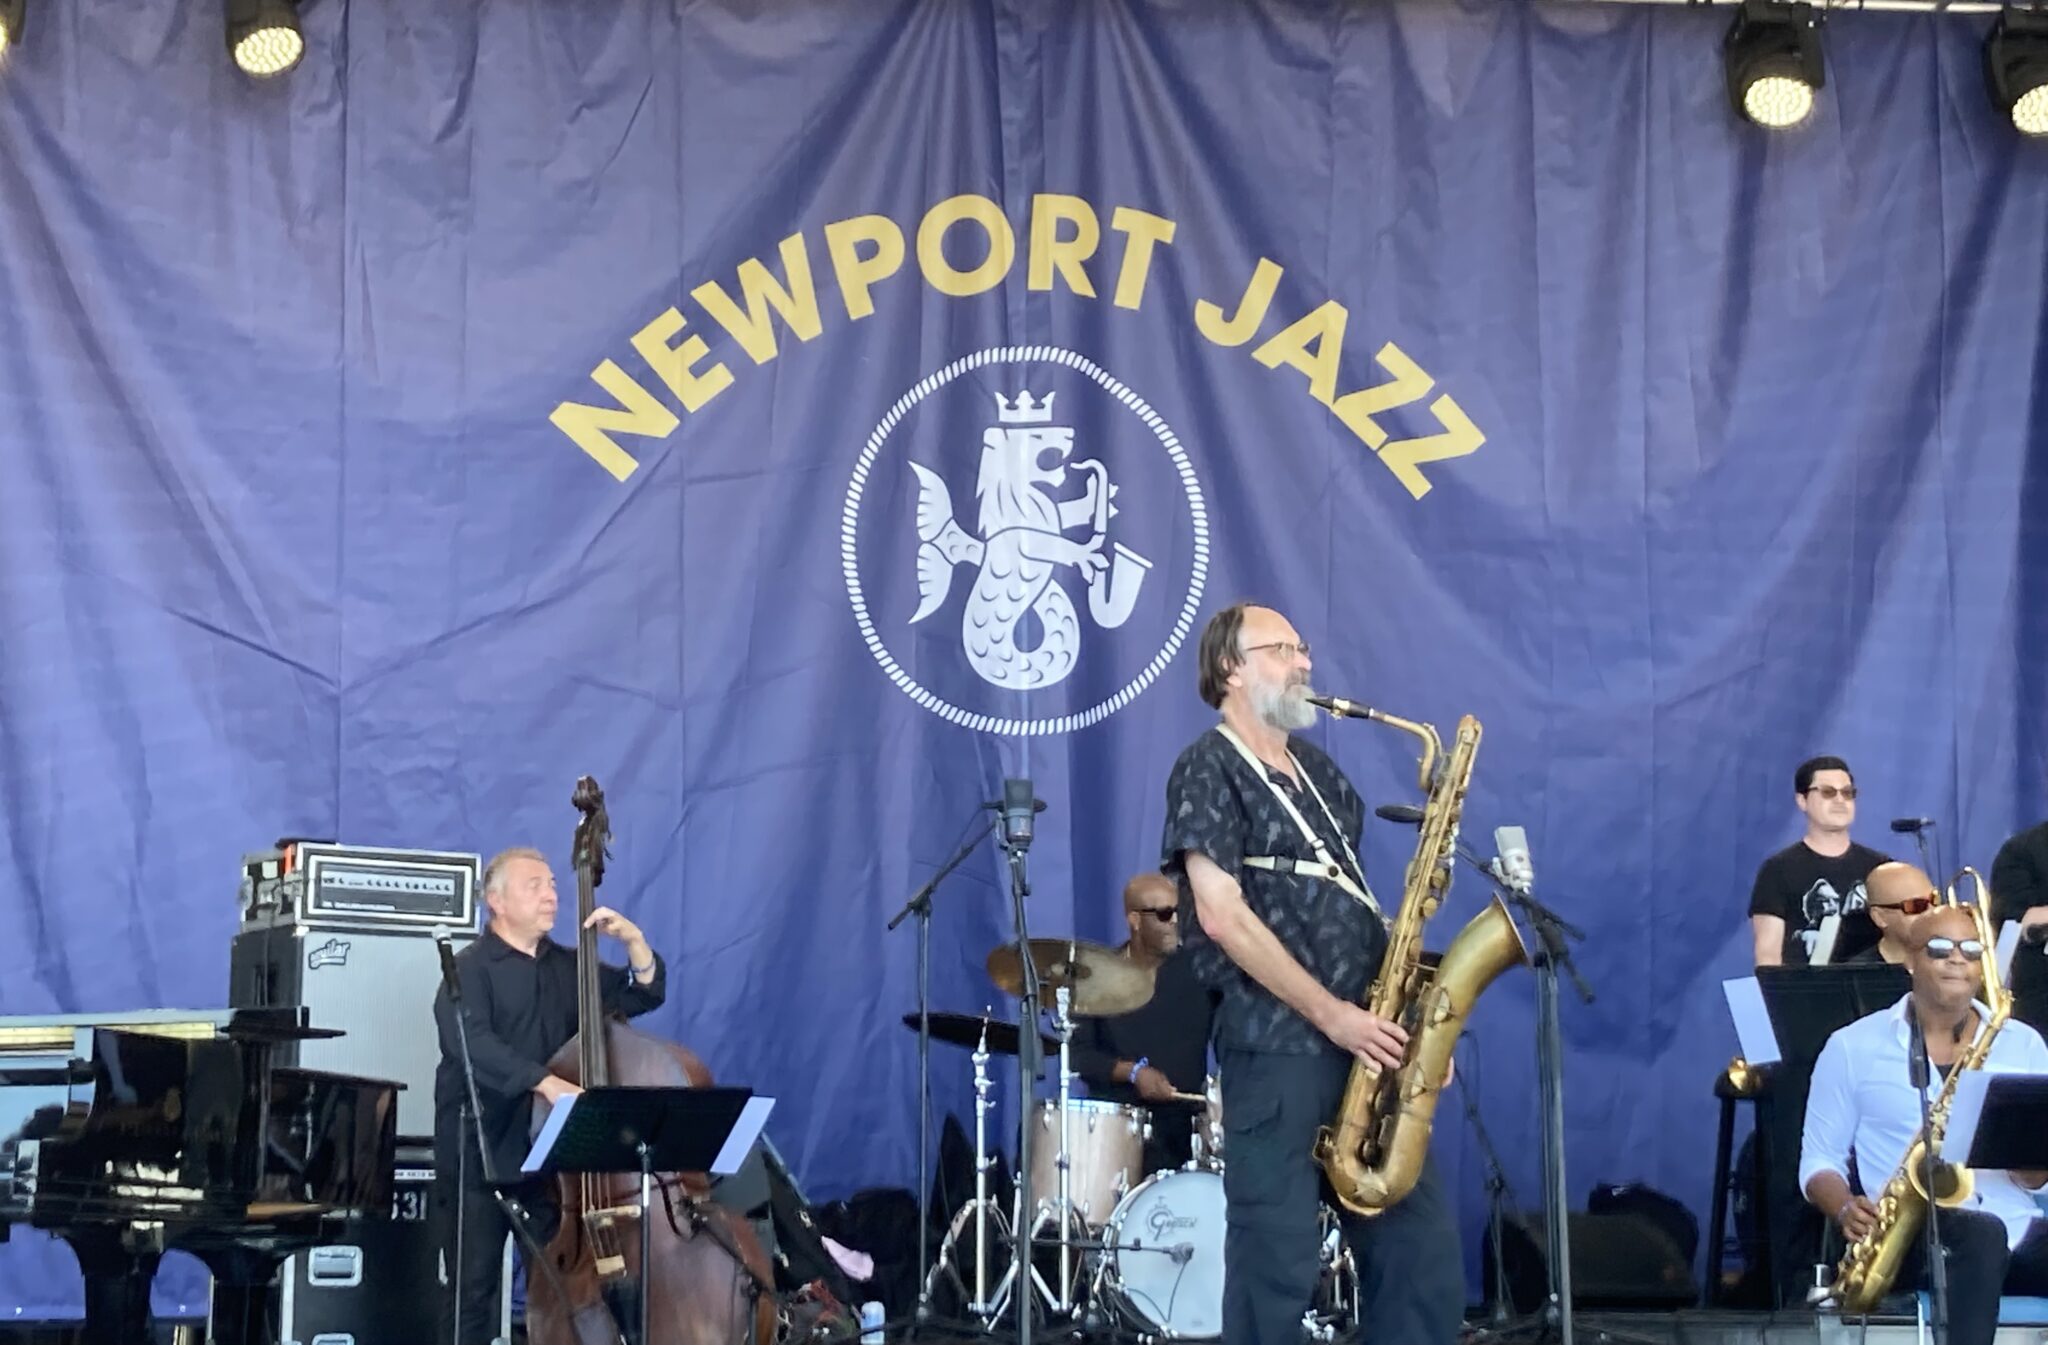 Doug Hall’s review of the 2022 Newport Jazz Festival